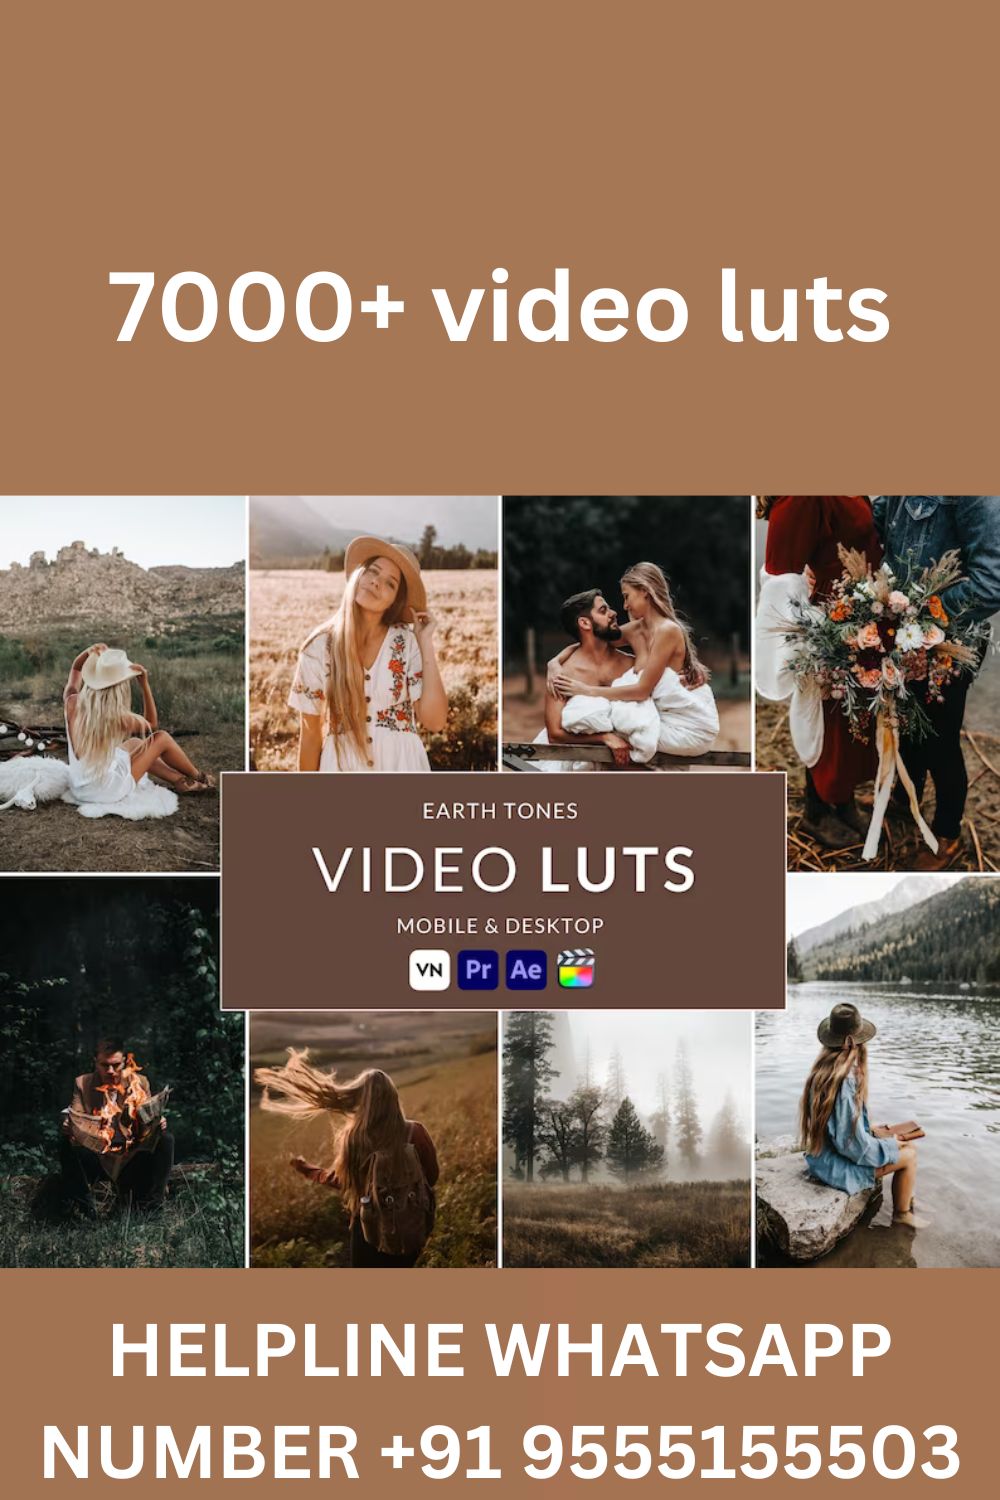 7000+ Video LUTs, Final Cut Pro luts, Film luts, Luts Video, Cube luts, Adobe Premiere Pro, Video Presets, Video Editing,VN editor pinterest preview image.